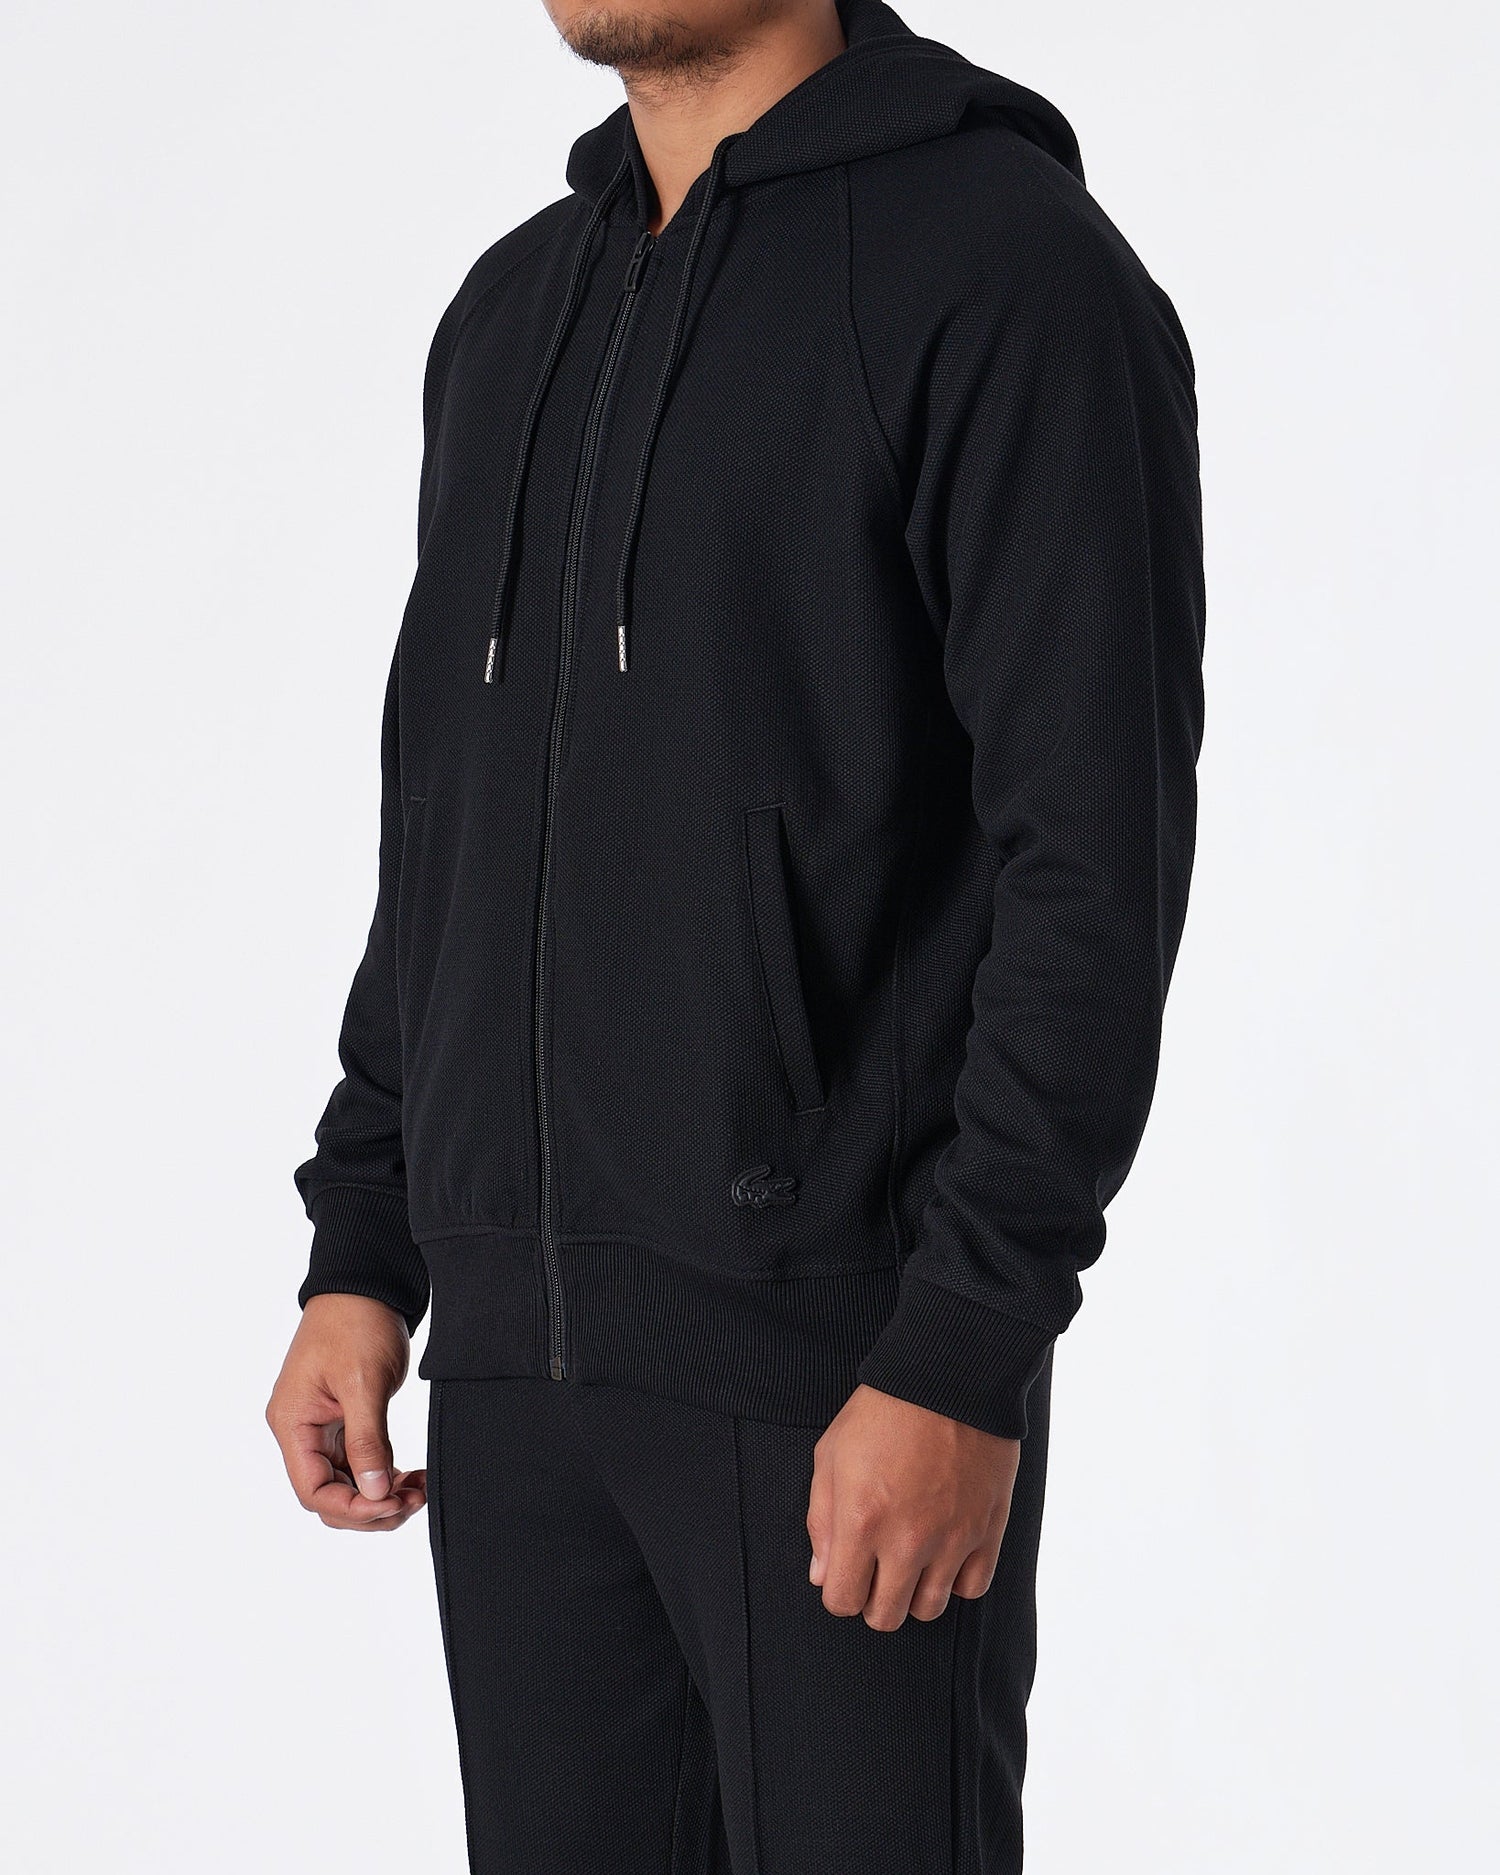 MOI OUTFIT-Casual Fit Men Black Hoodie 24.90